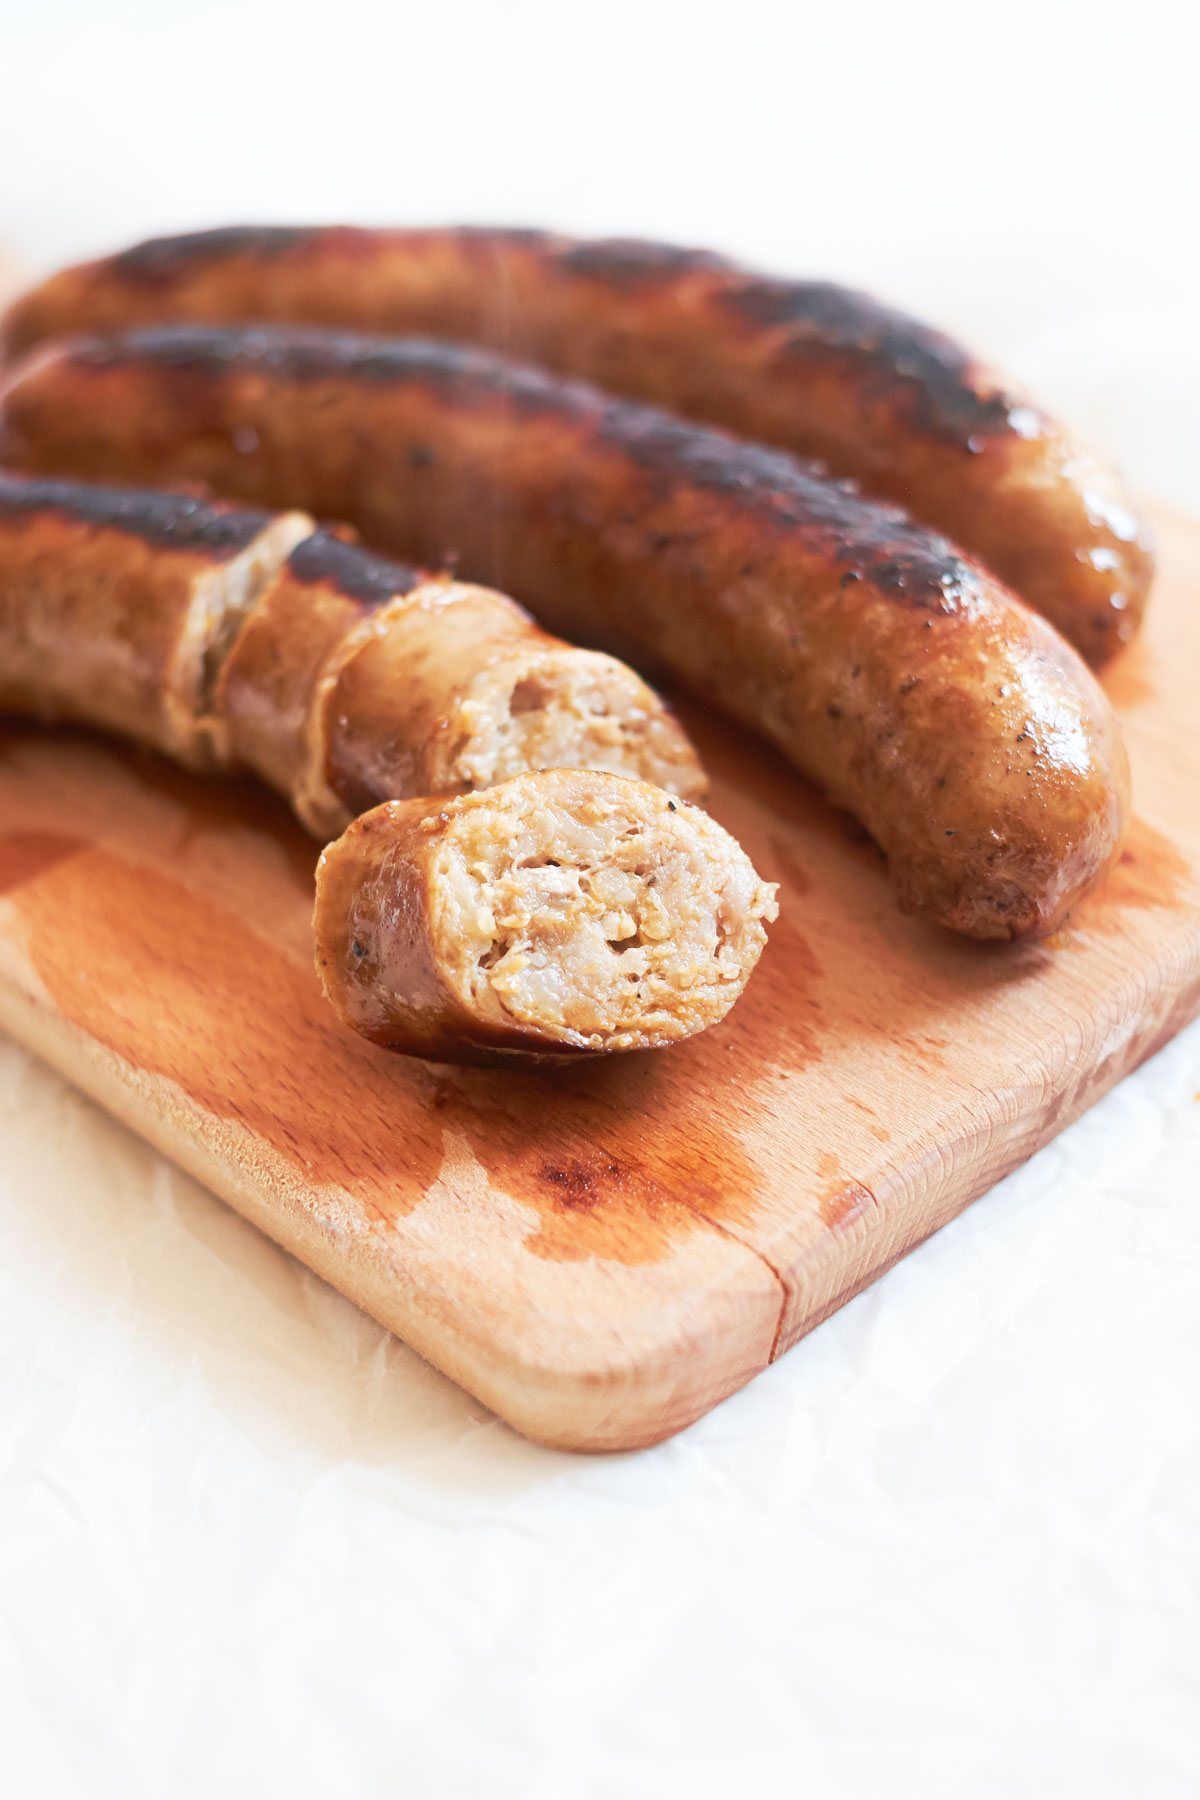 How To Cook Italian Sausage